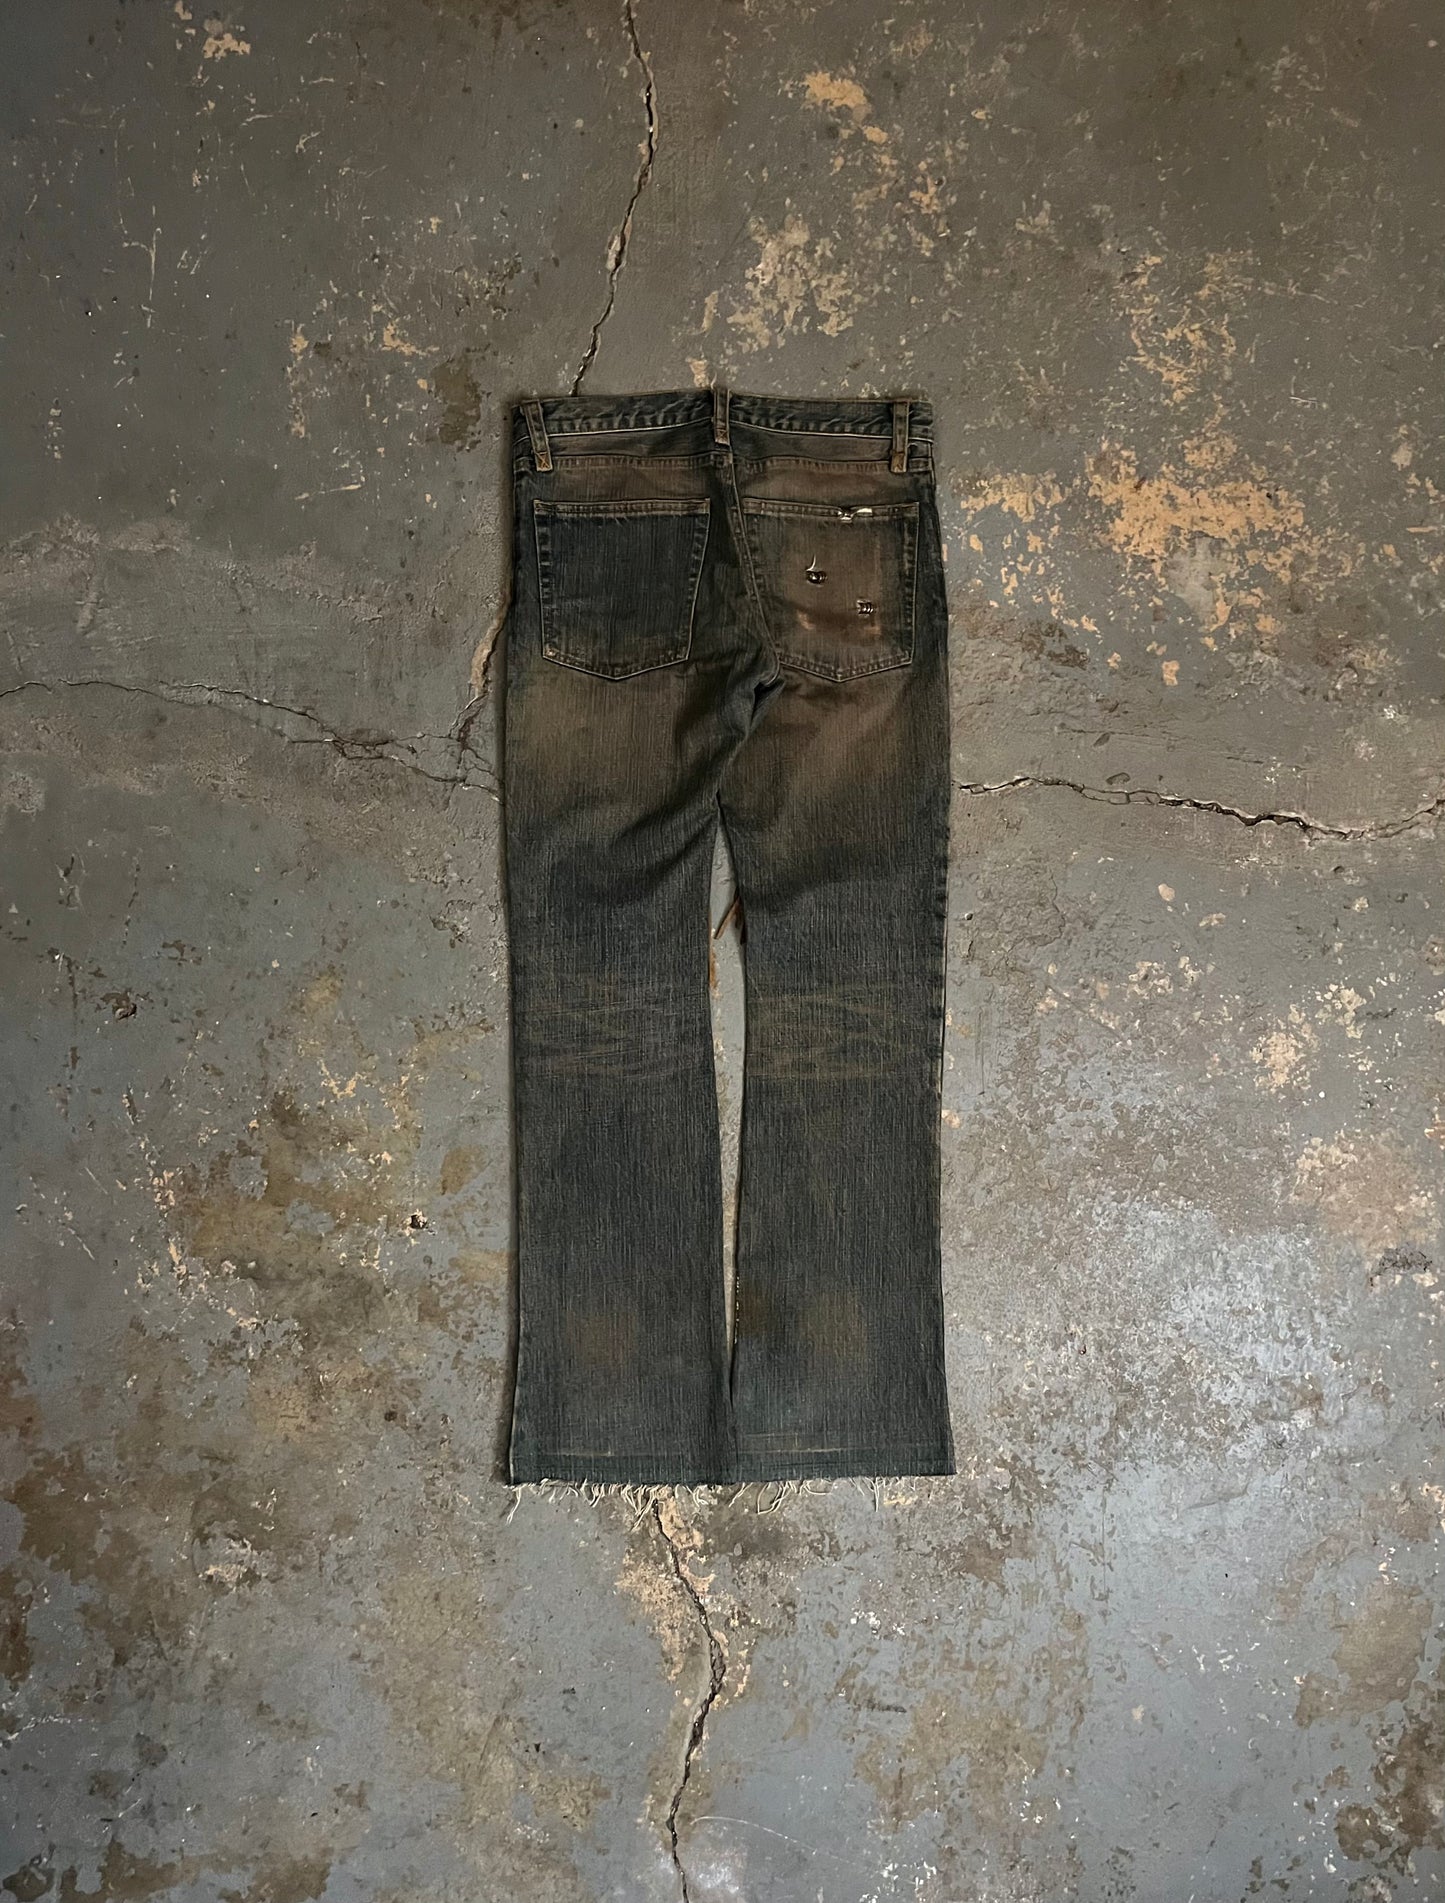 IFSIXWASNINE Lace Up Pierced Bootcut Jeans